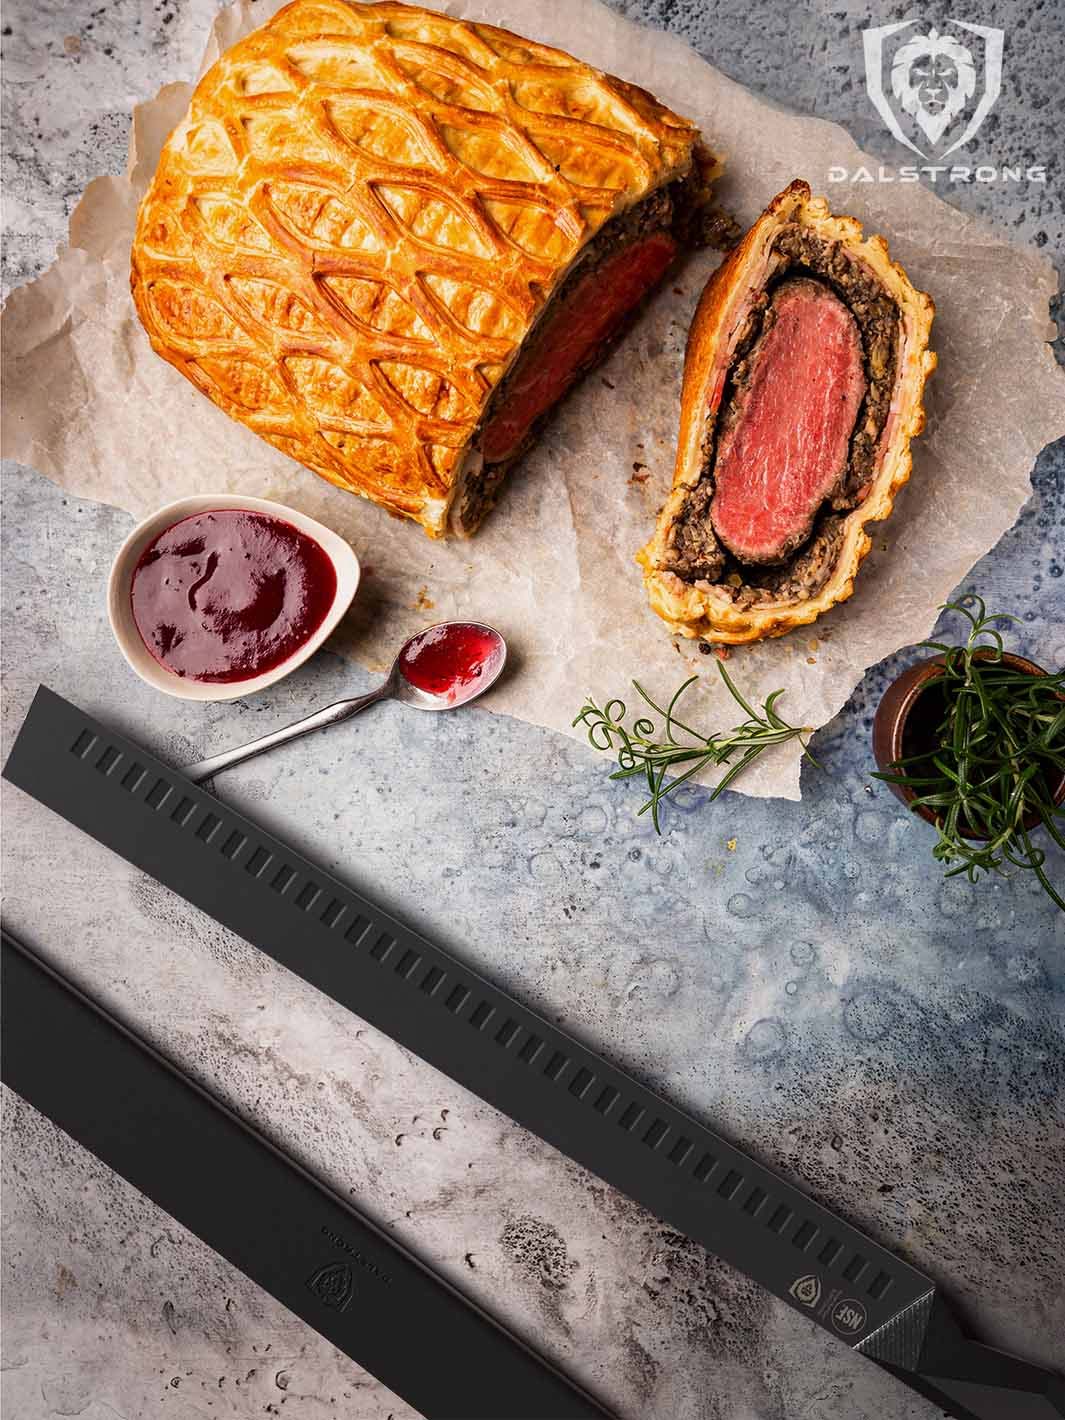 Dalstrong shadow black series 14 inch slicer knife with a sliced beef wellington.